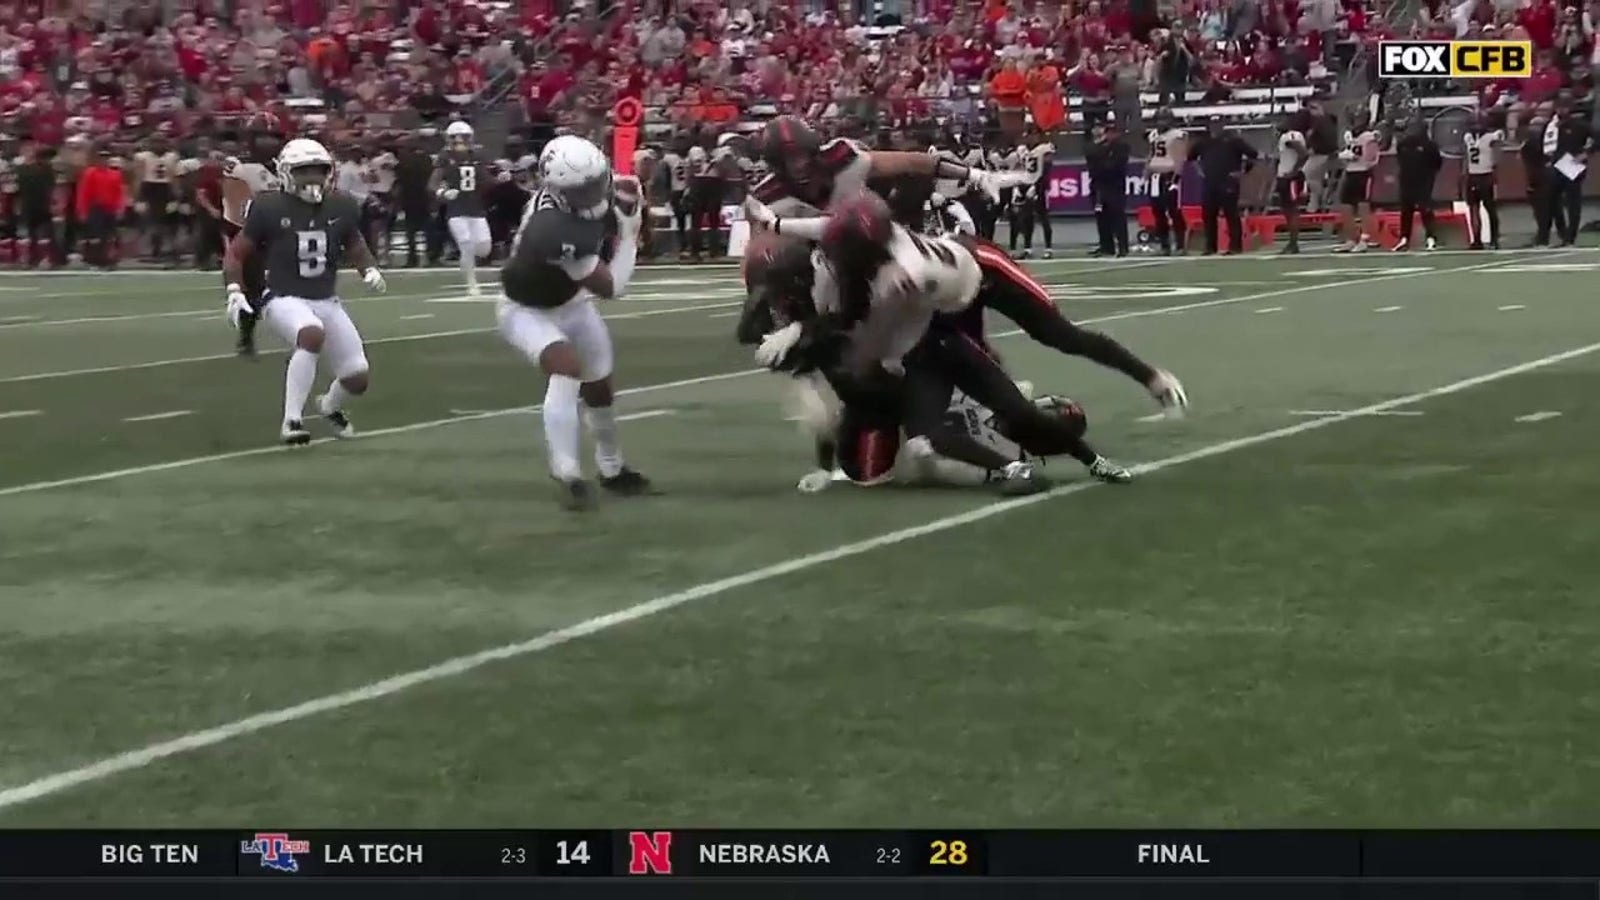 Washington State's Josh Kelly breaks MULTIPLE tackles en route to UNREAL TD against Oregon State